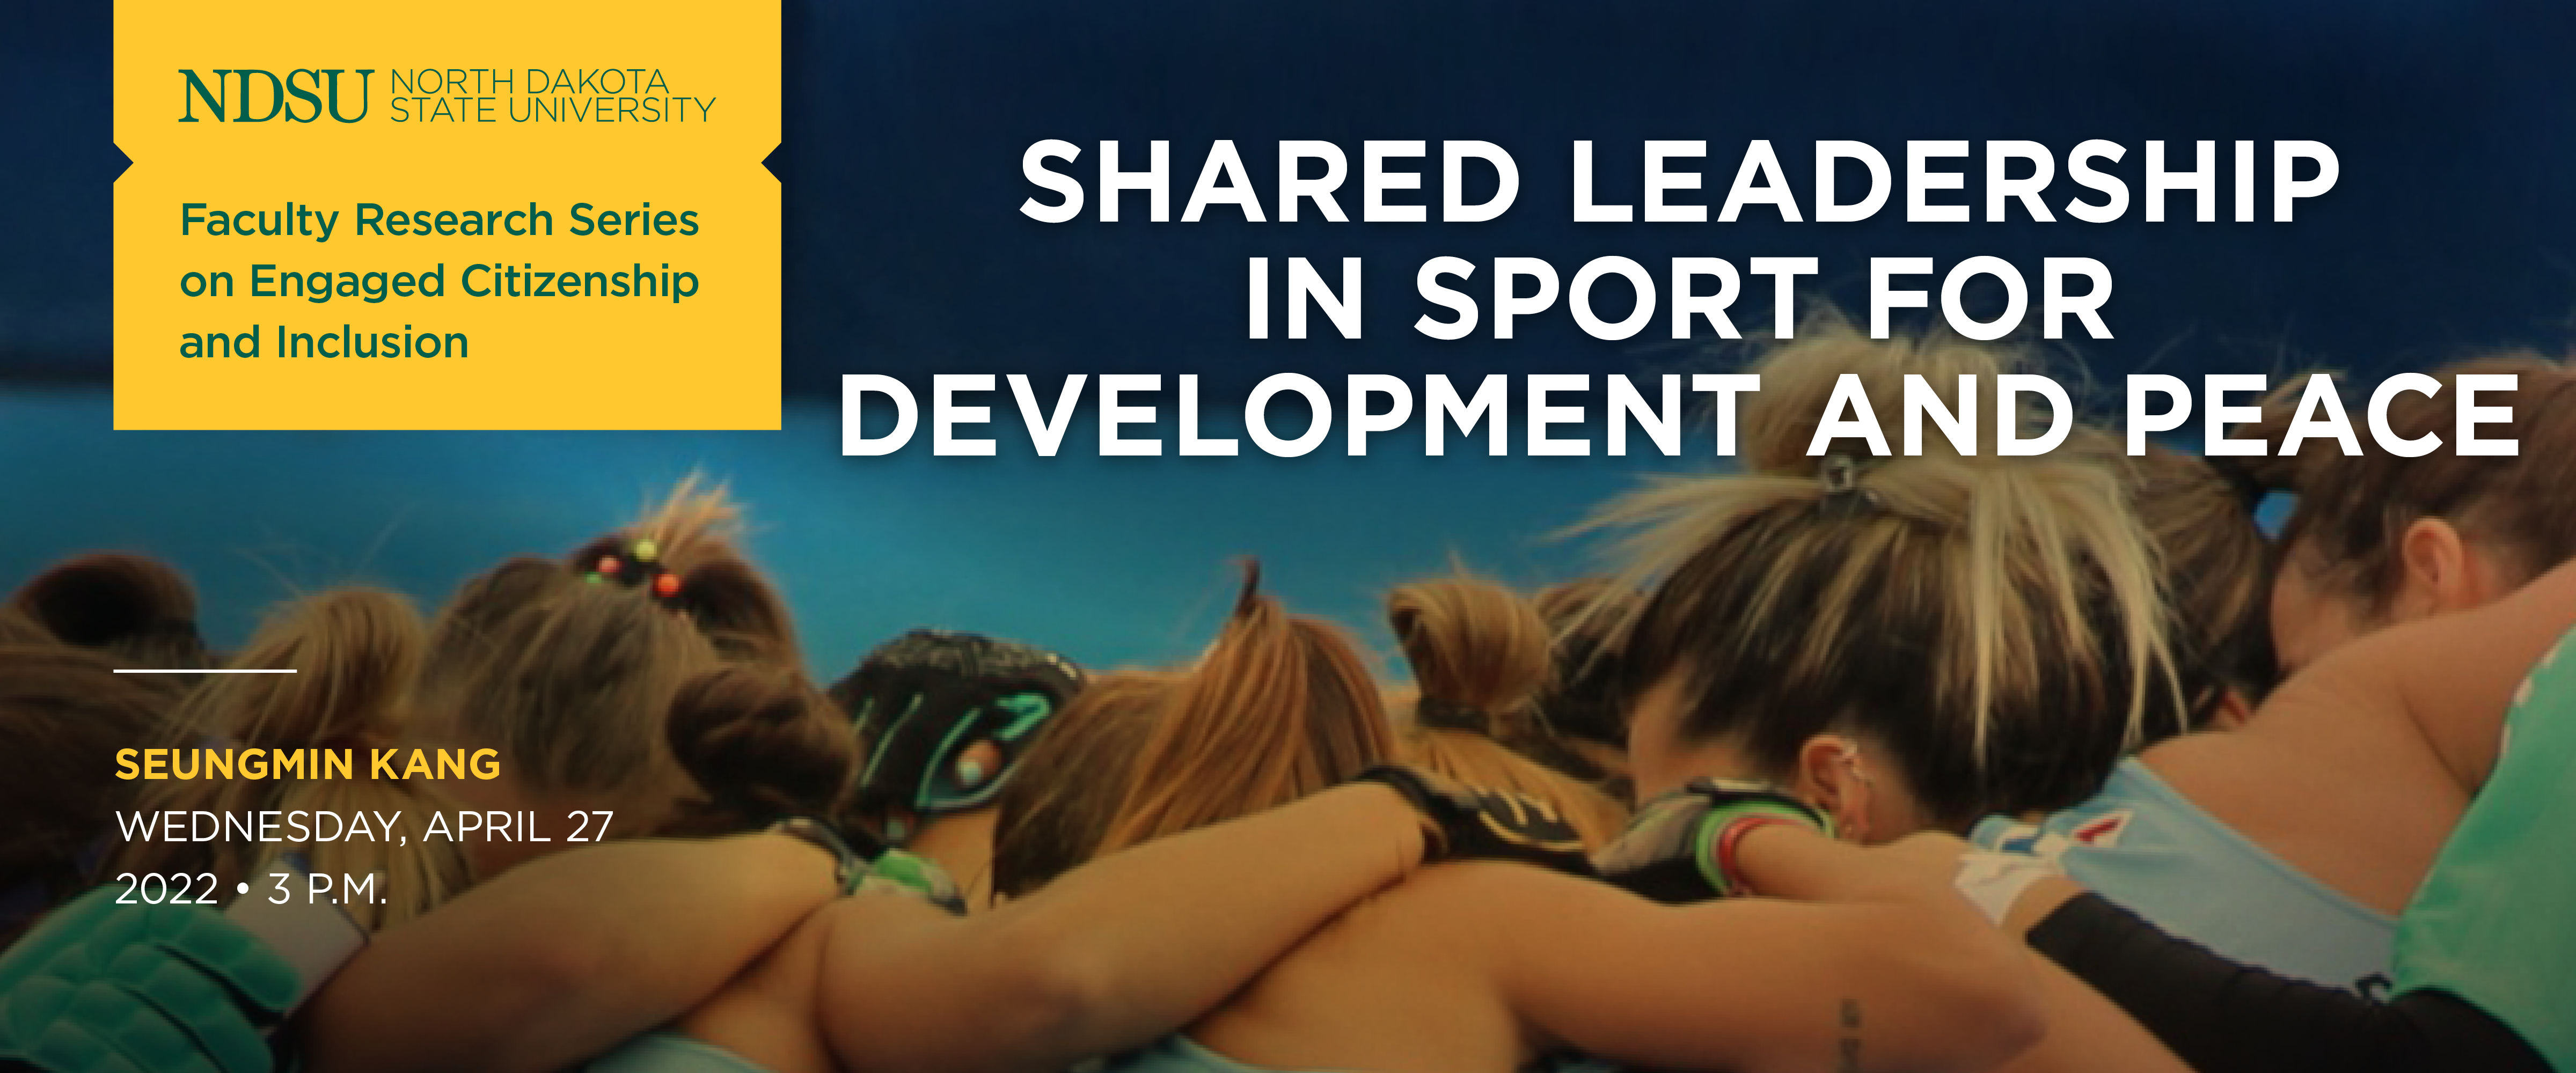 Shared Leadership in Sport for Development and Peace, presented by Dr. Seungmin Kang, Wednesday, April 27, 2022, at 3pm